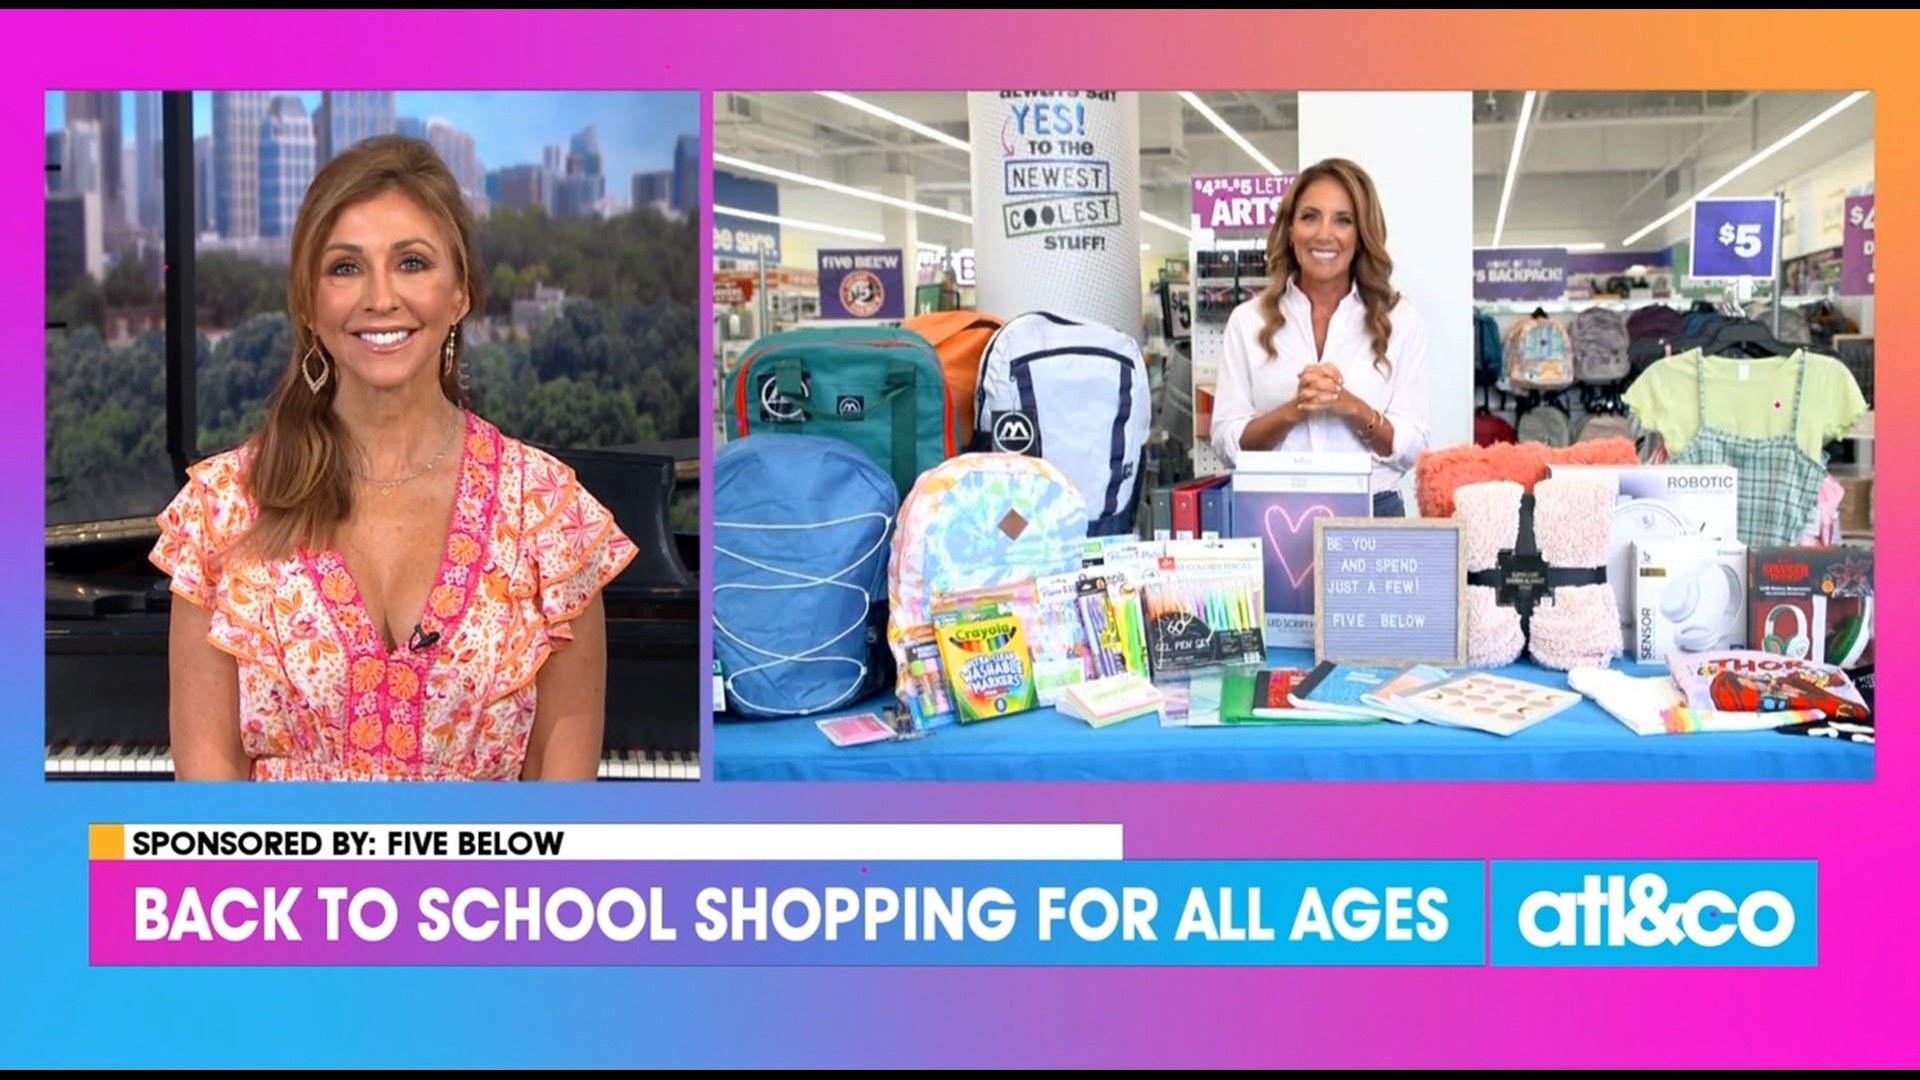 Lifestyle editor Barbara Majeski has the best deals from Five Below to check off your school supply lists.